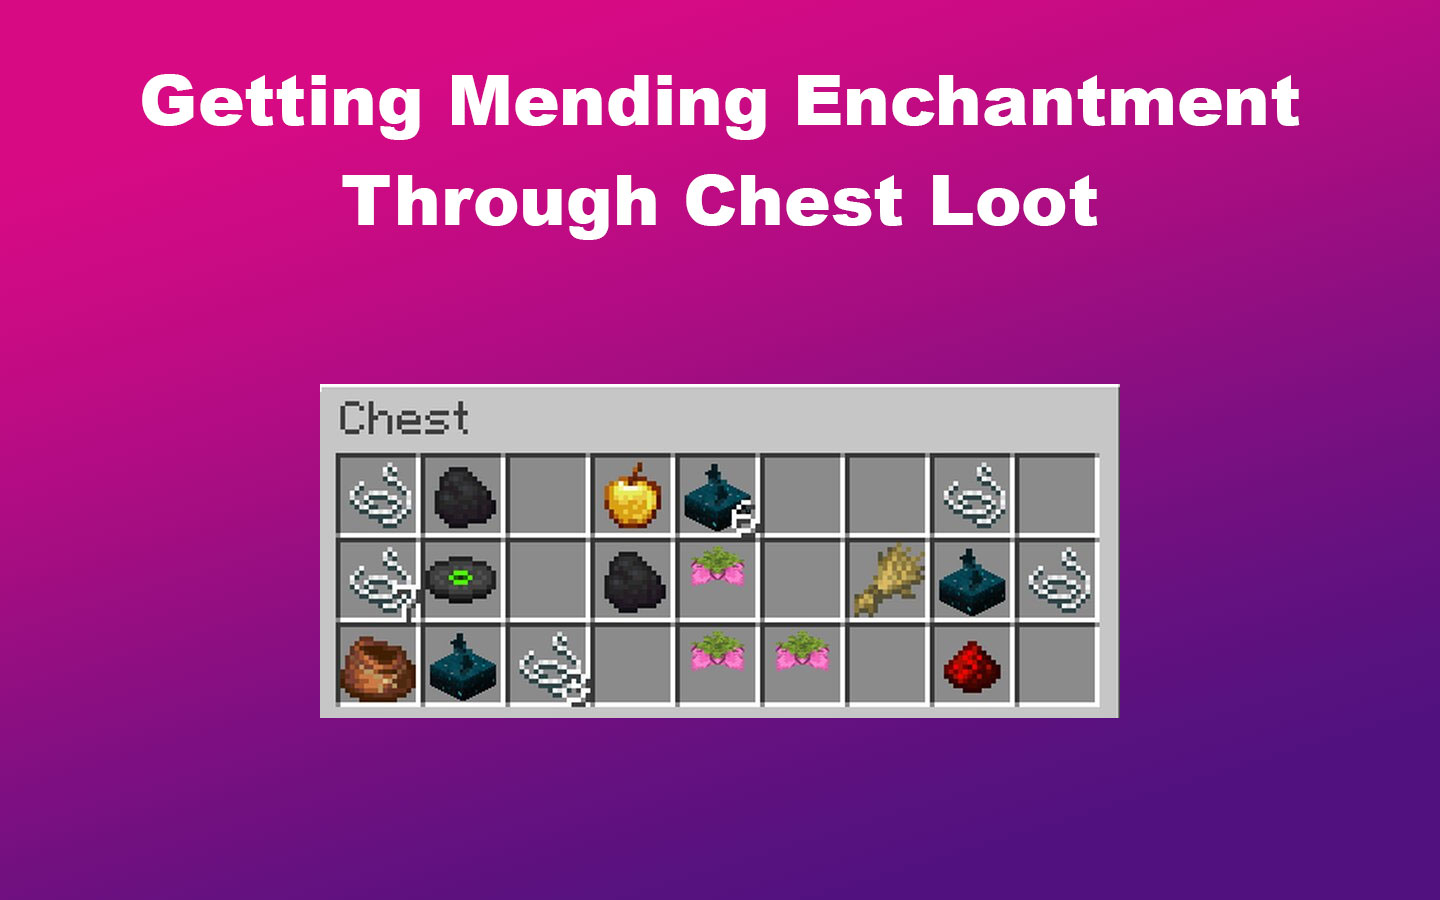 Getting Mending Enchantment Through Chest Loot